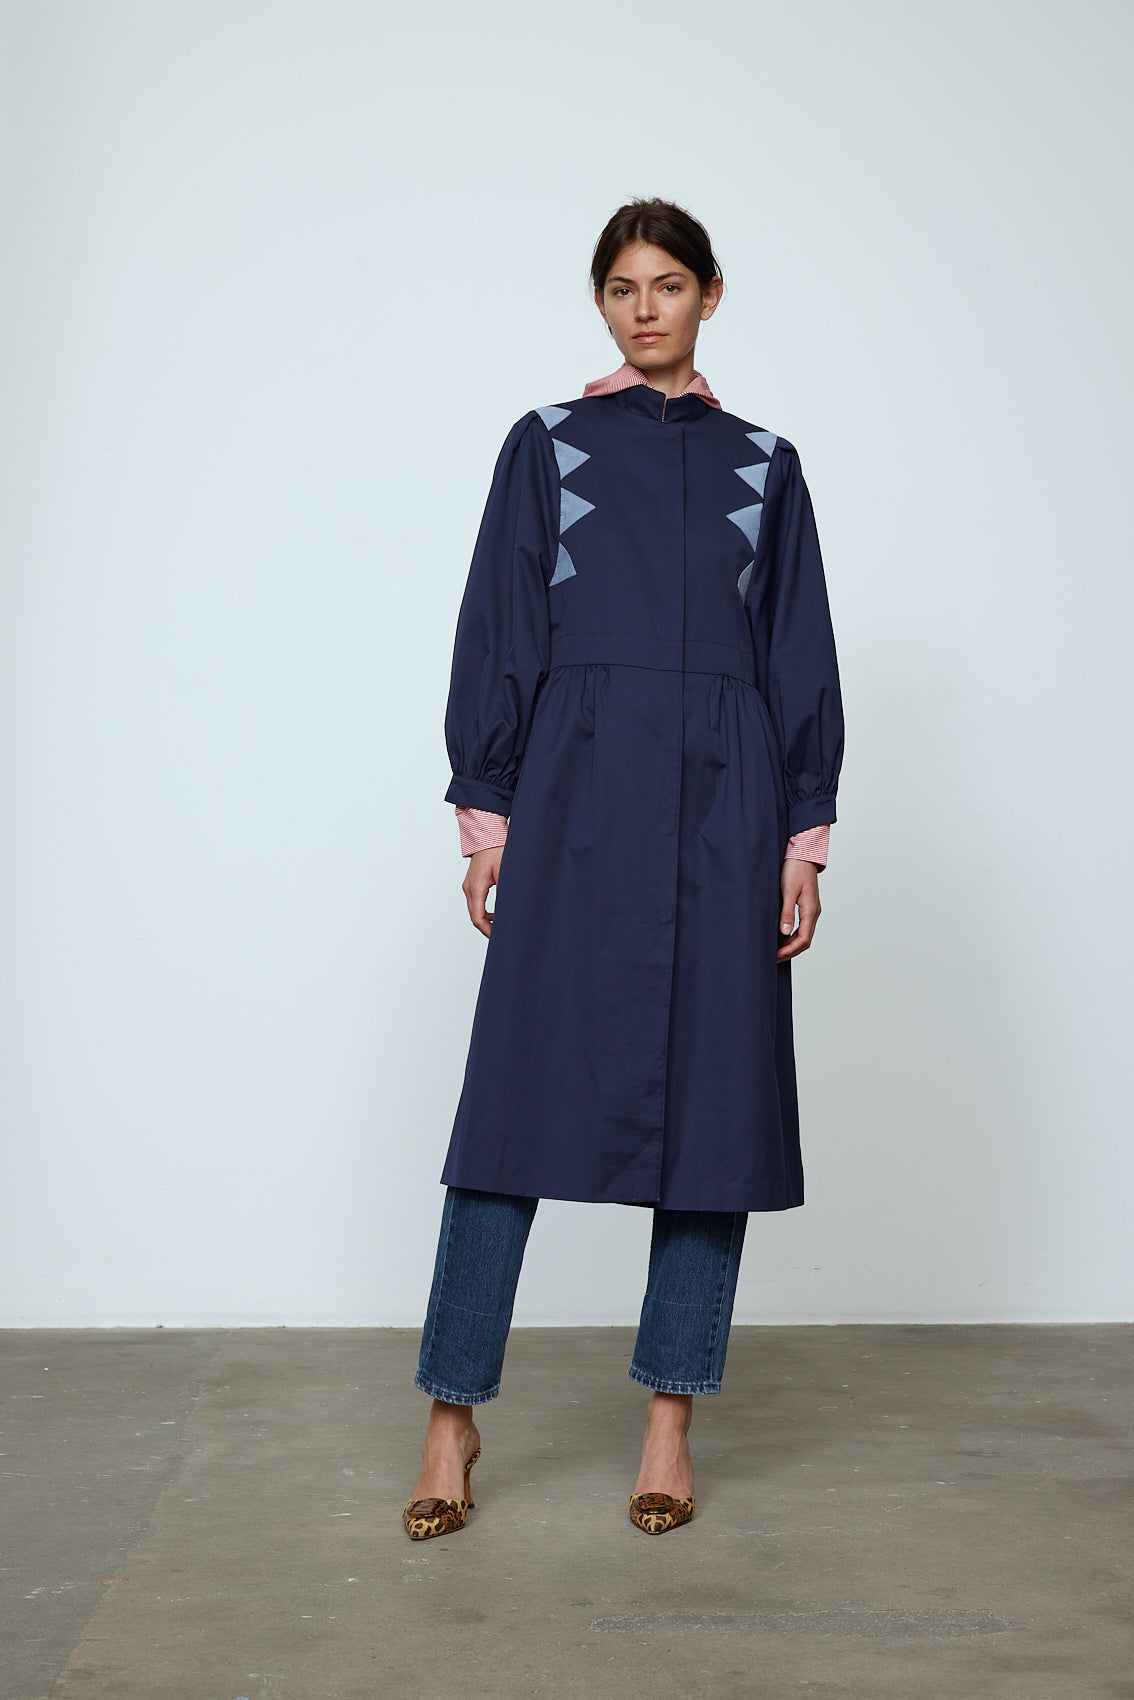 Agnes Coat in Navy Canvas with Dove Blue corduroy triangular details. The Jacket features a hidden push-button closing and balloon sleeves.  Material: Shell: 100% cotton. Lining: 100% viscose.